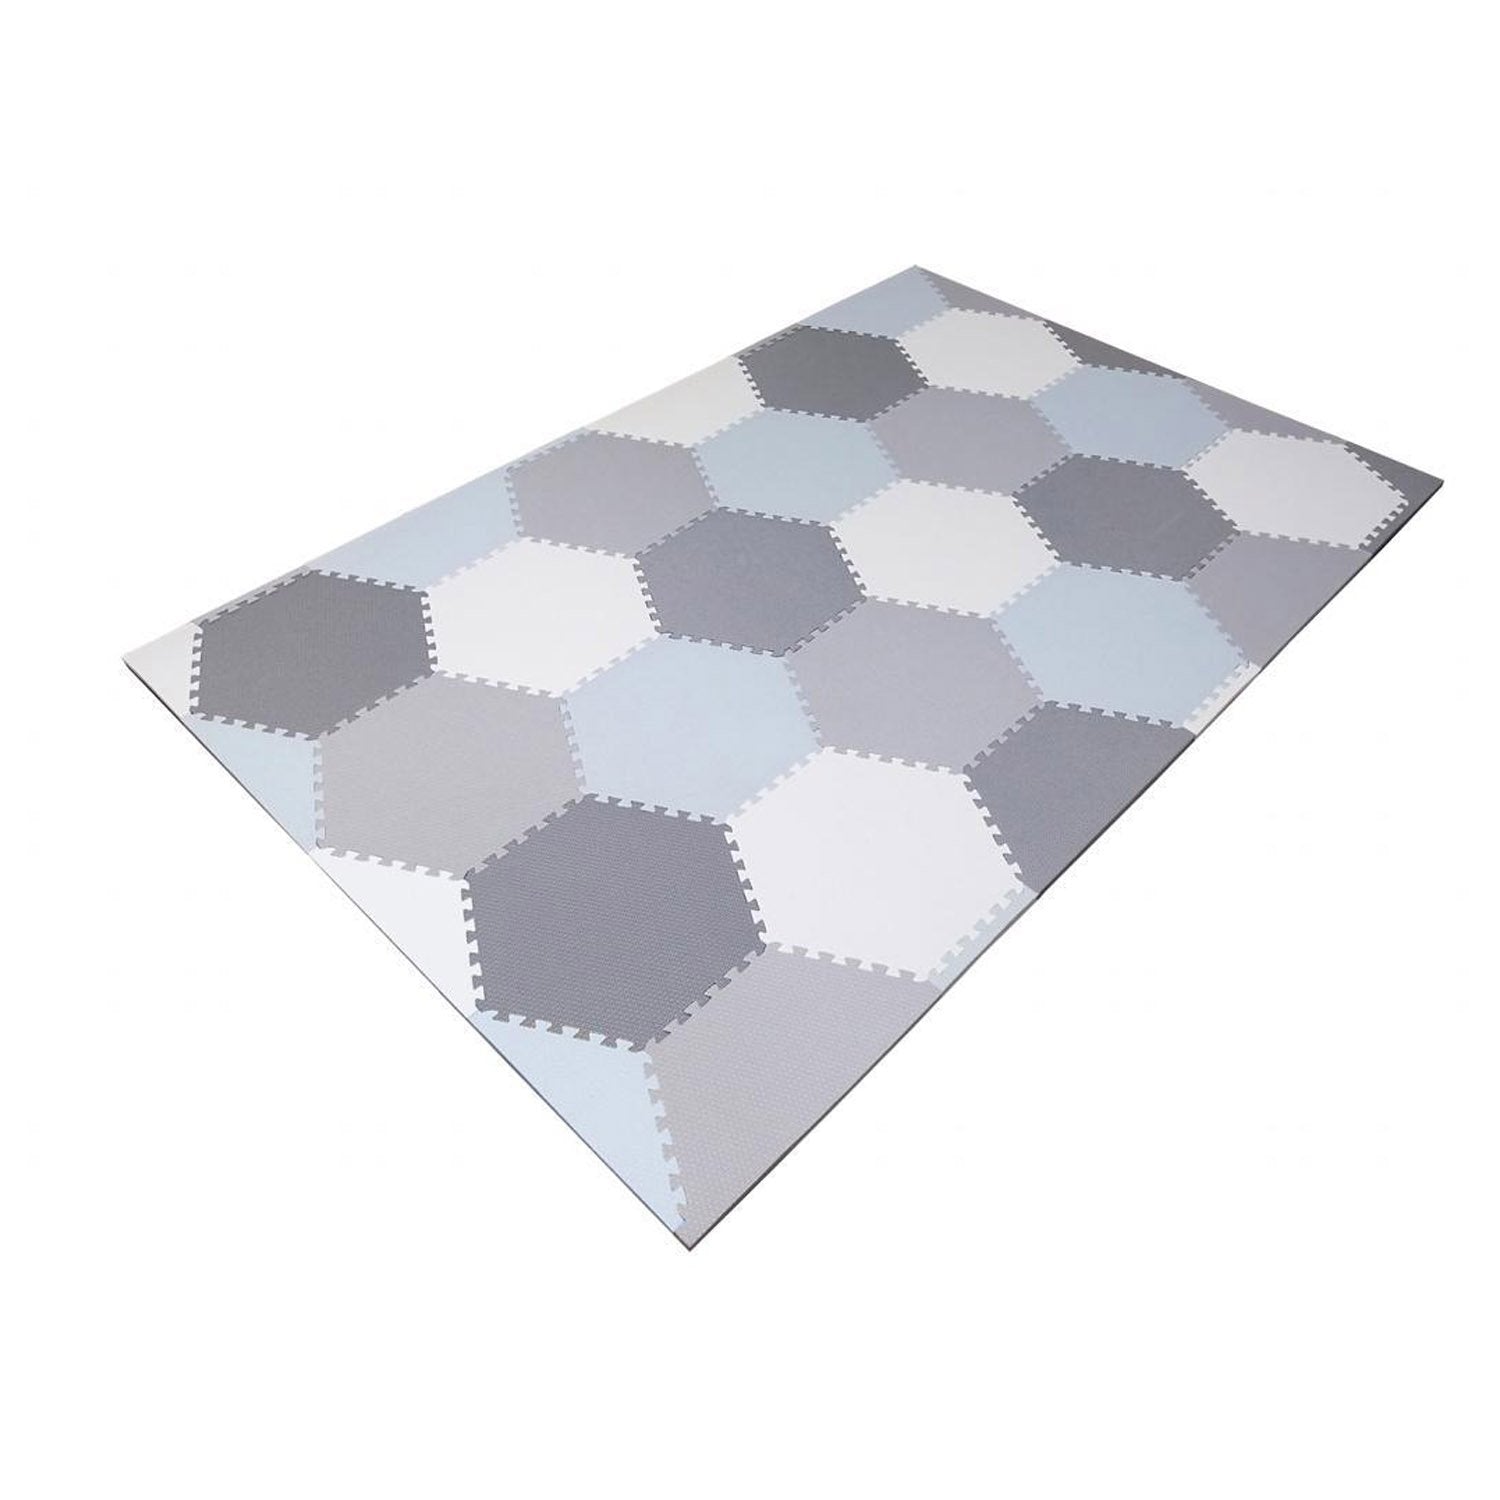 Non-Toxic Foam Puzzle Floor Mat, Comfortable, Extra Thick